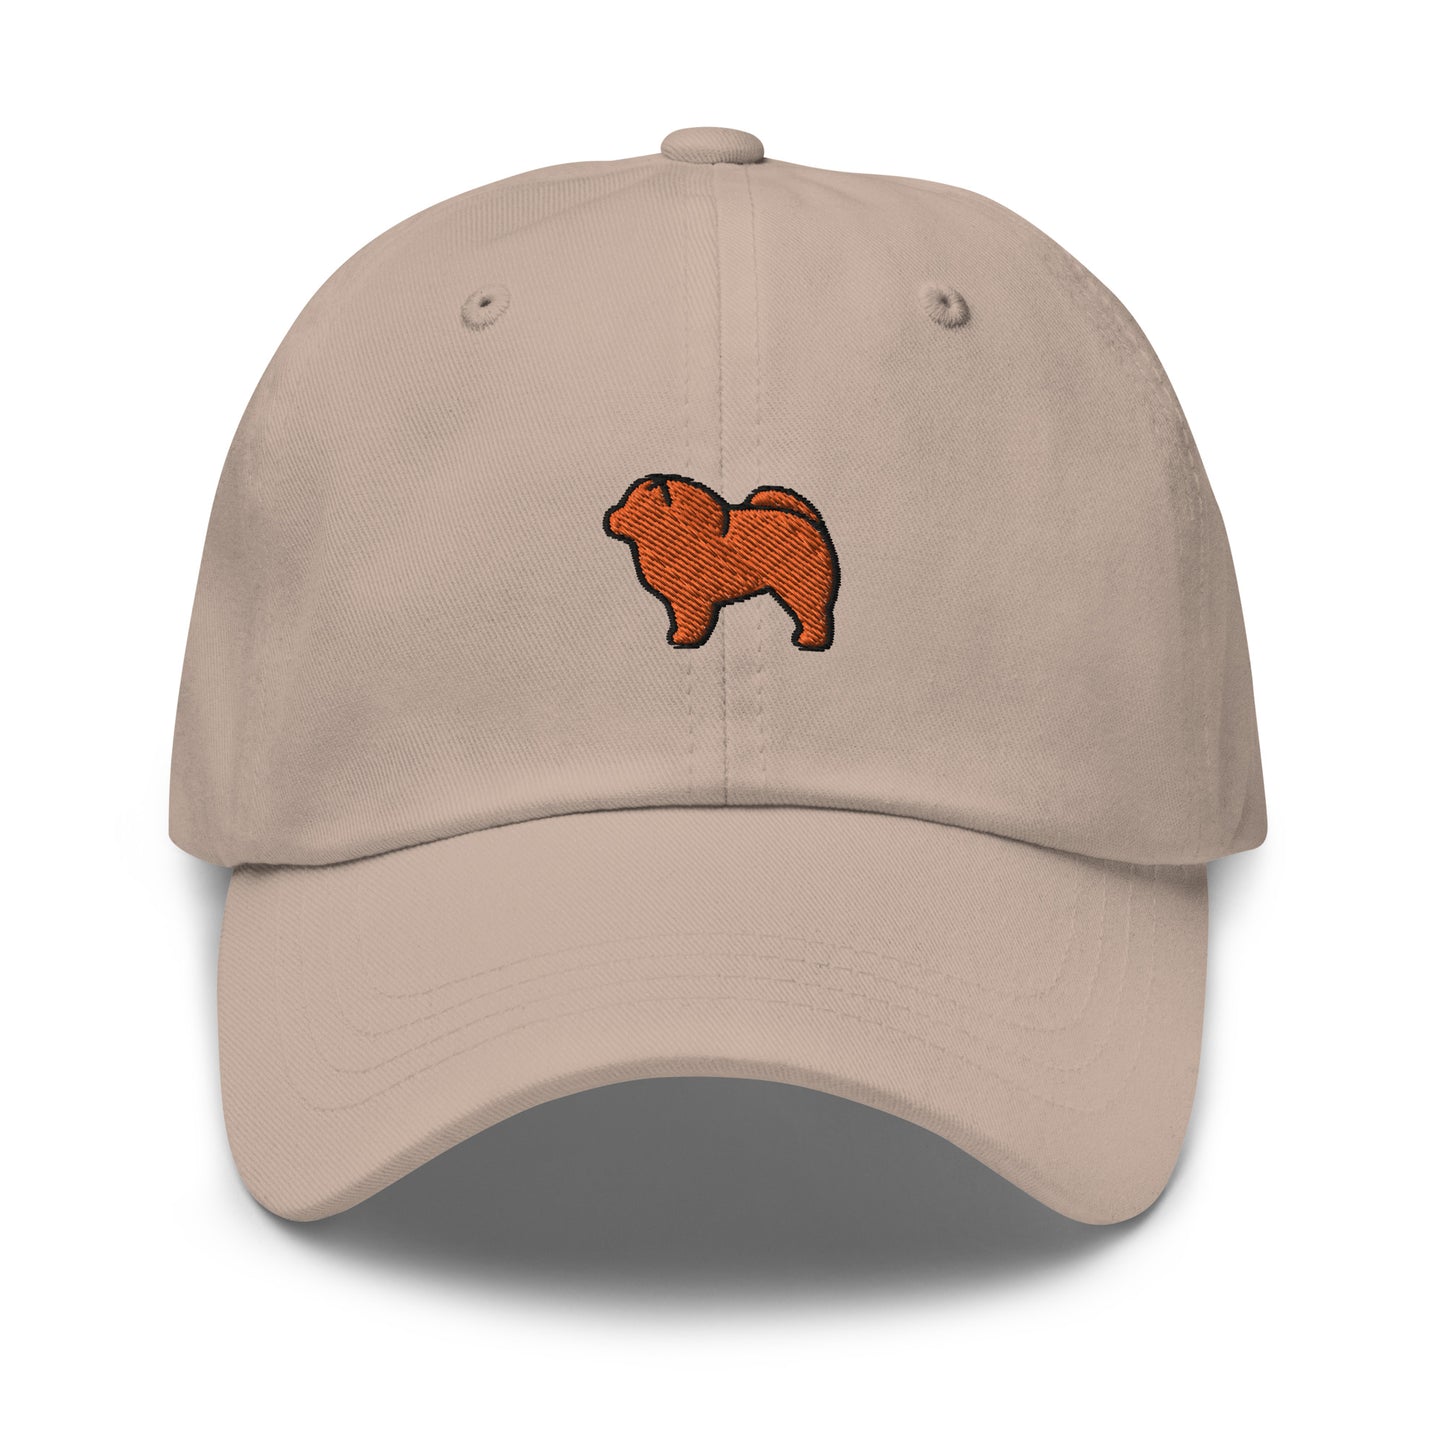 Chow Chow Dog Embroidered Baseball Cap